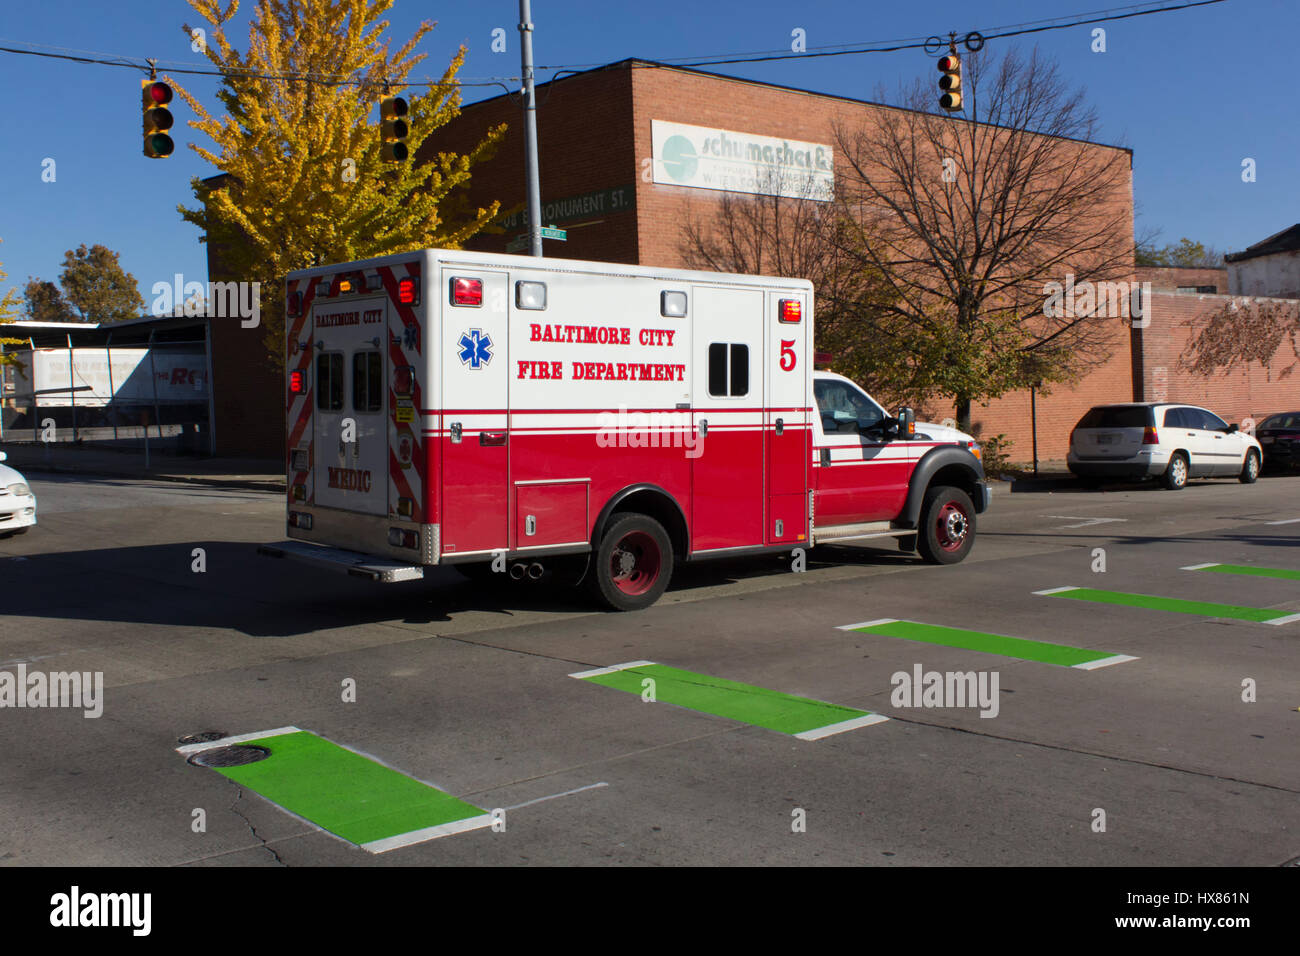 BALTIMORE, MARYLAND - NOVEMBER 18, 2016: Baltimore City Fire Department ambulance on a call on Greenmount Ave. Stock Photo